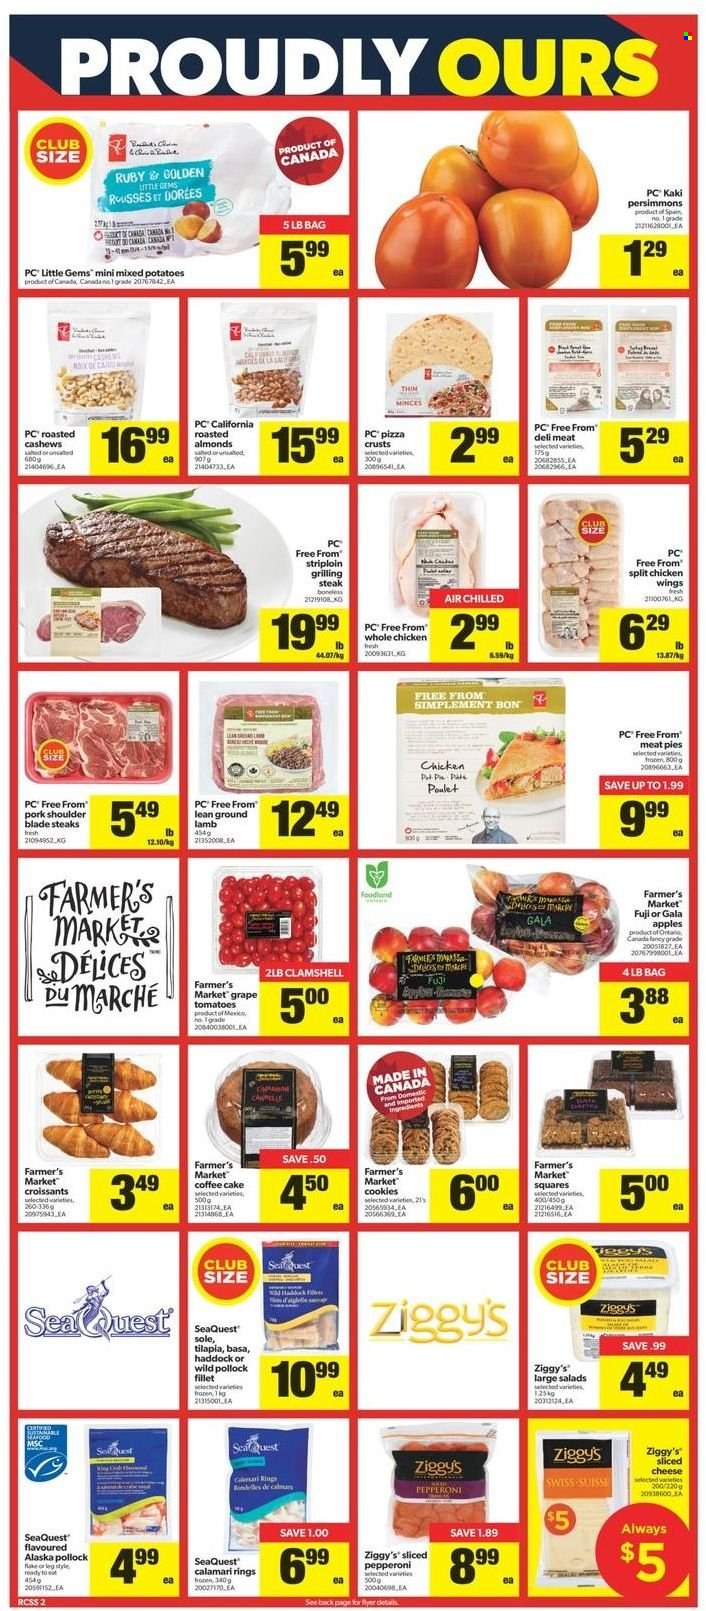 thumbnail - Real Canadian Superstore Flyer - January 13, 2022 - January 19, 2022 - Sales products - cake, croissant, coffee cake, potatoes, apples, Gala, persimmons, calamari, tilapia, haddock, pollock, seafood, pizza, pepperoni, sliced cheese, chicken wings, cookies, almonds, cashews, whole chicken, chicken, ground pork, pork meat, pork shoulder, steak. Page 2.